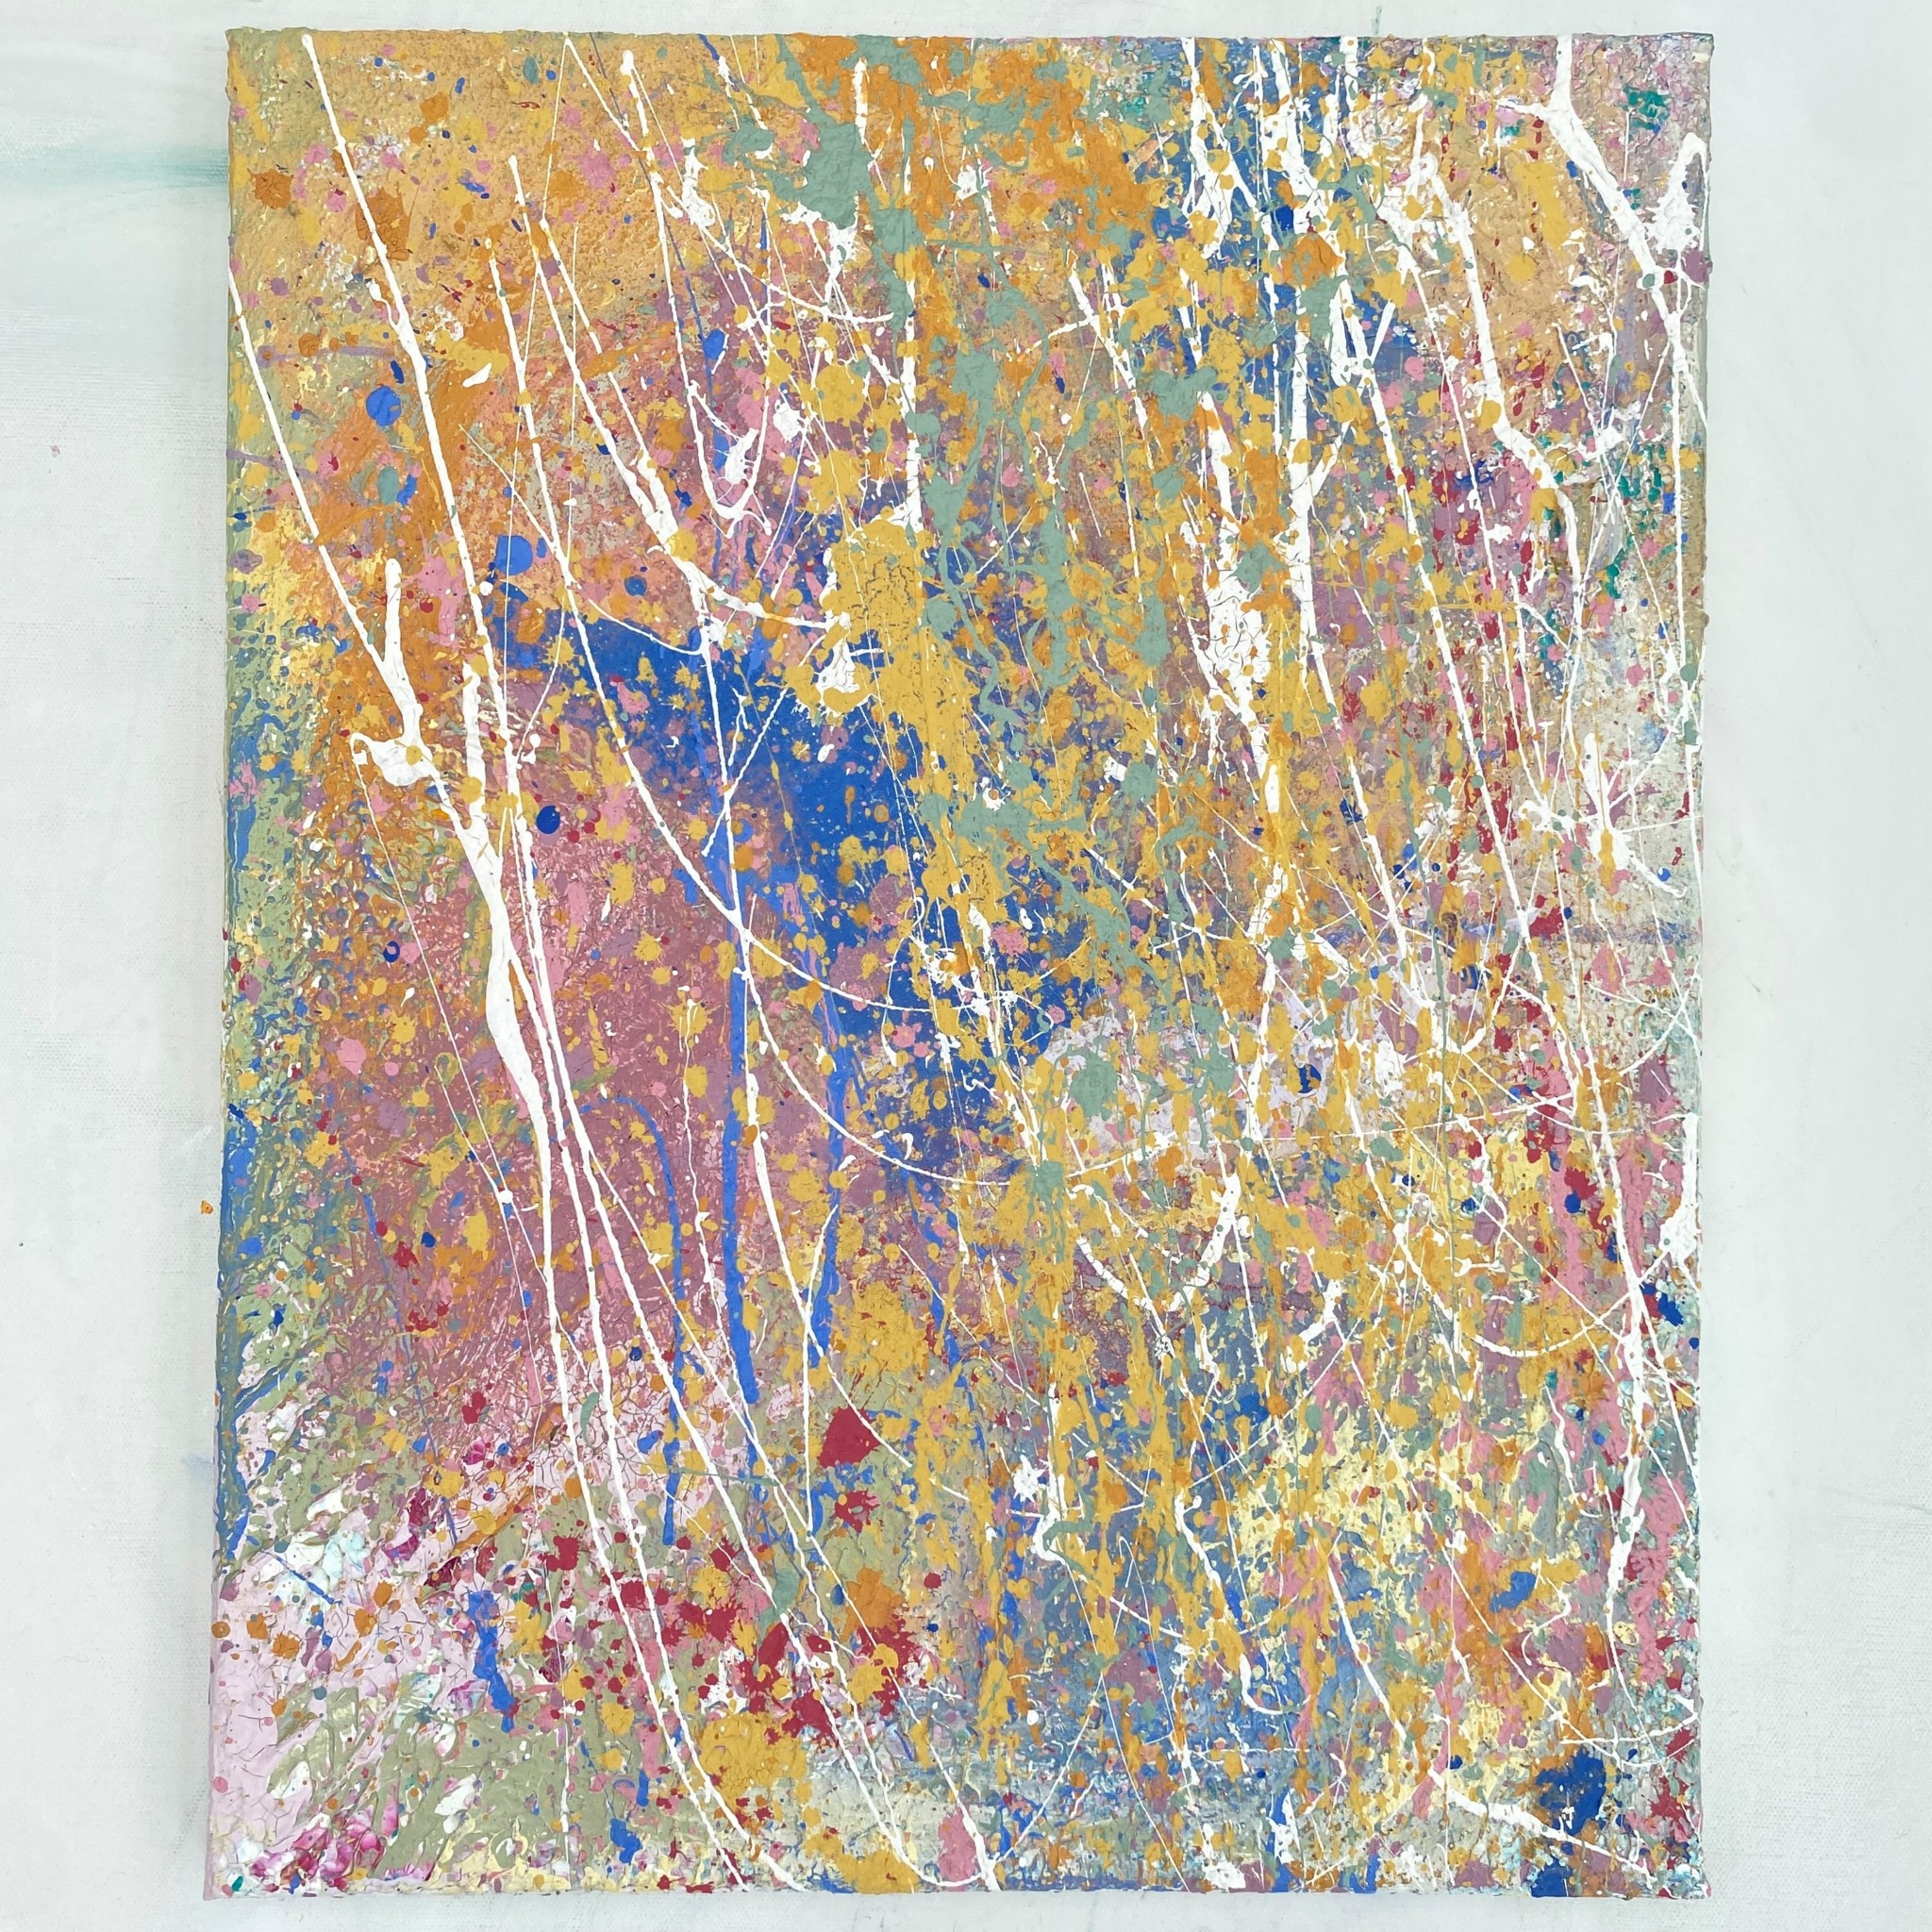 Full view of elemental an abstract original painting created with eco friendly paints by Emily Duchscherer Kirk.